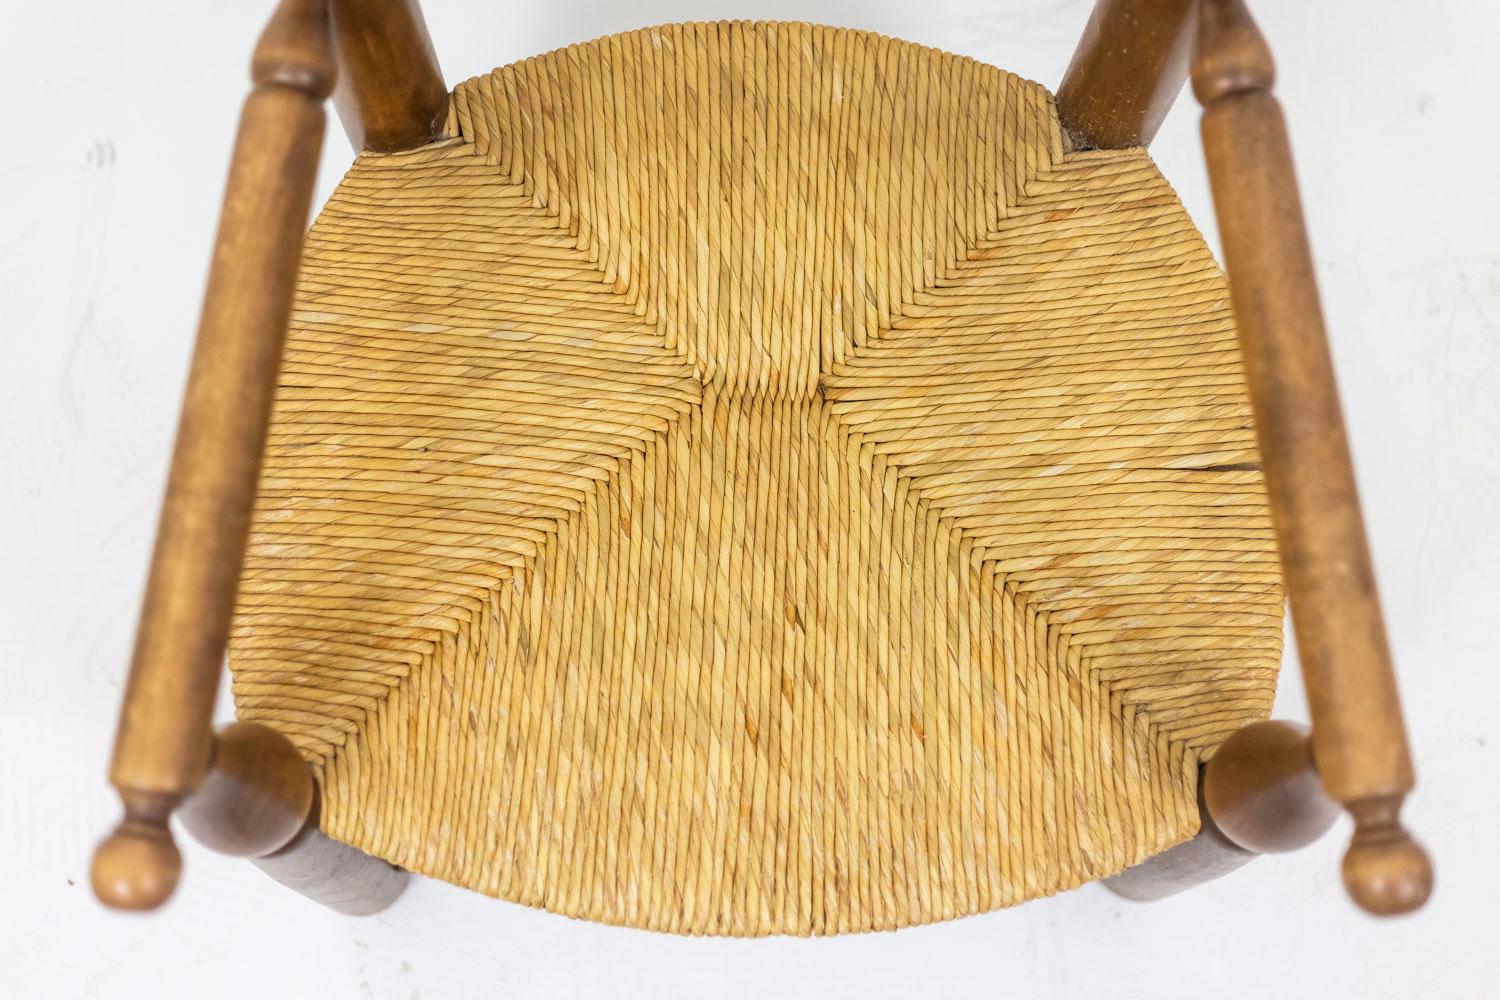  Pair of Straw Armchairs in Natural Beech, 1950's For Sale 7